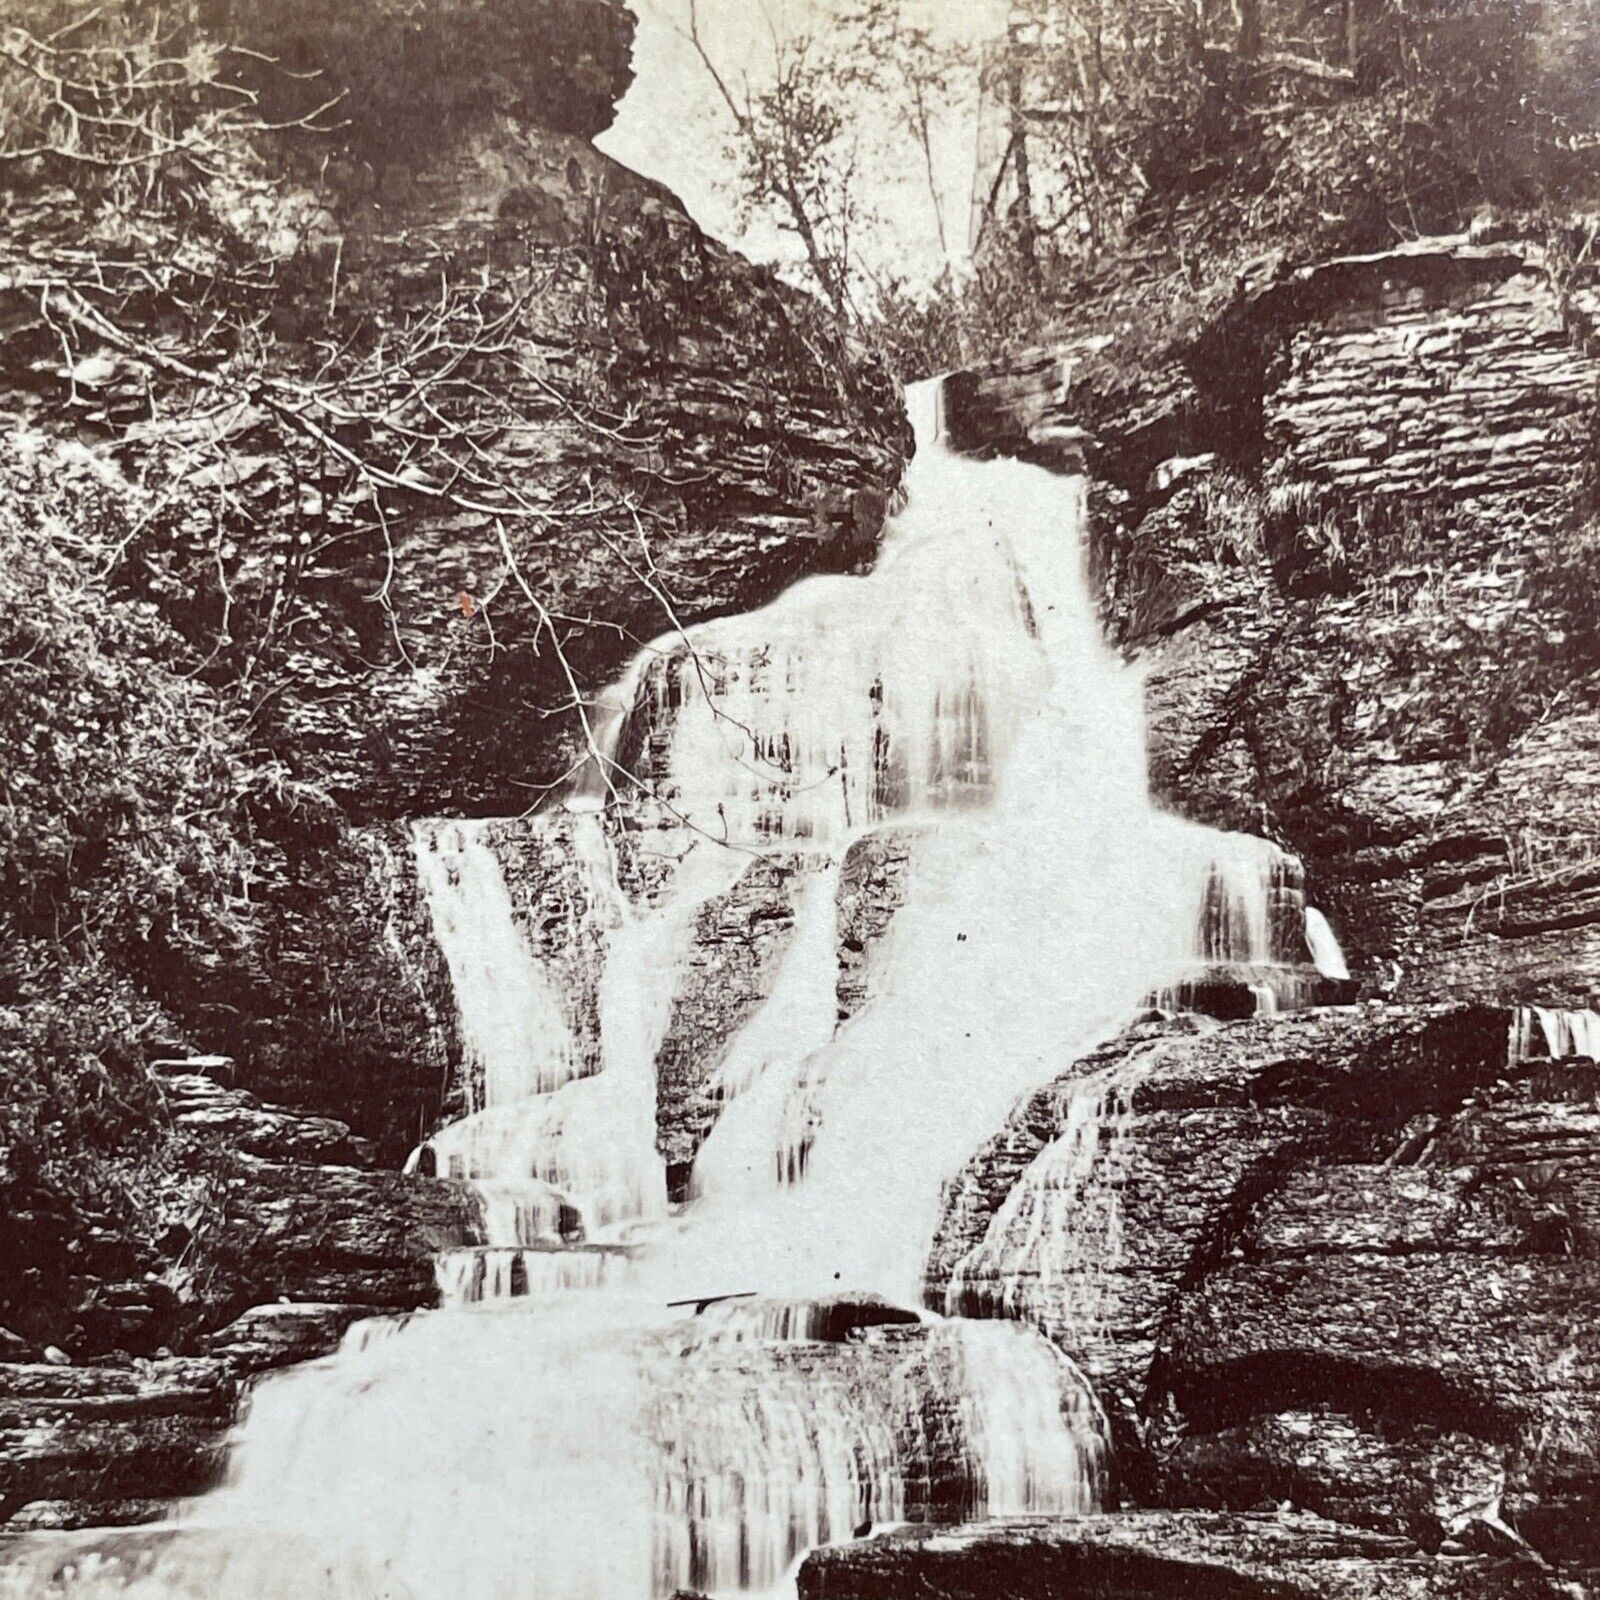 Antique 1870s Leatherstocking Falls Cooperstown NY Stereoview Photo Card V523